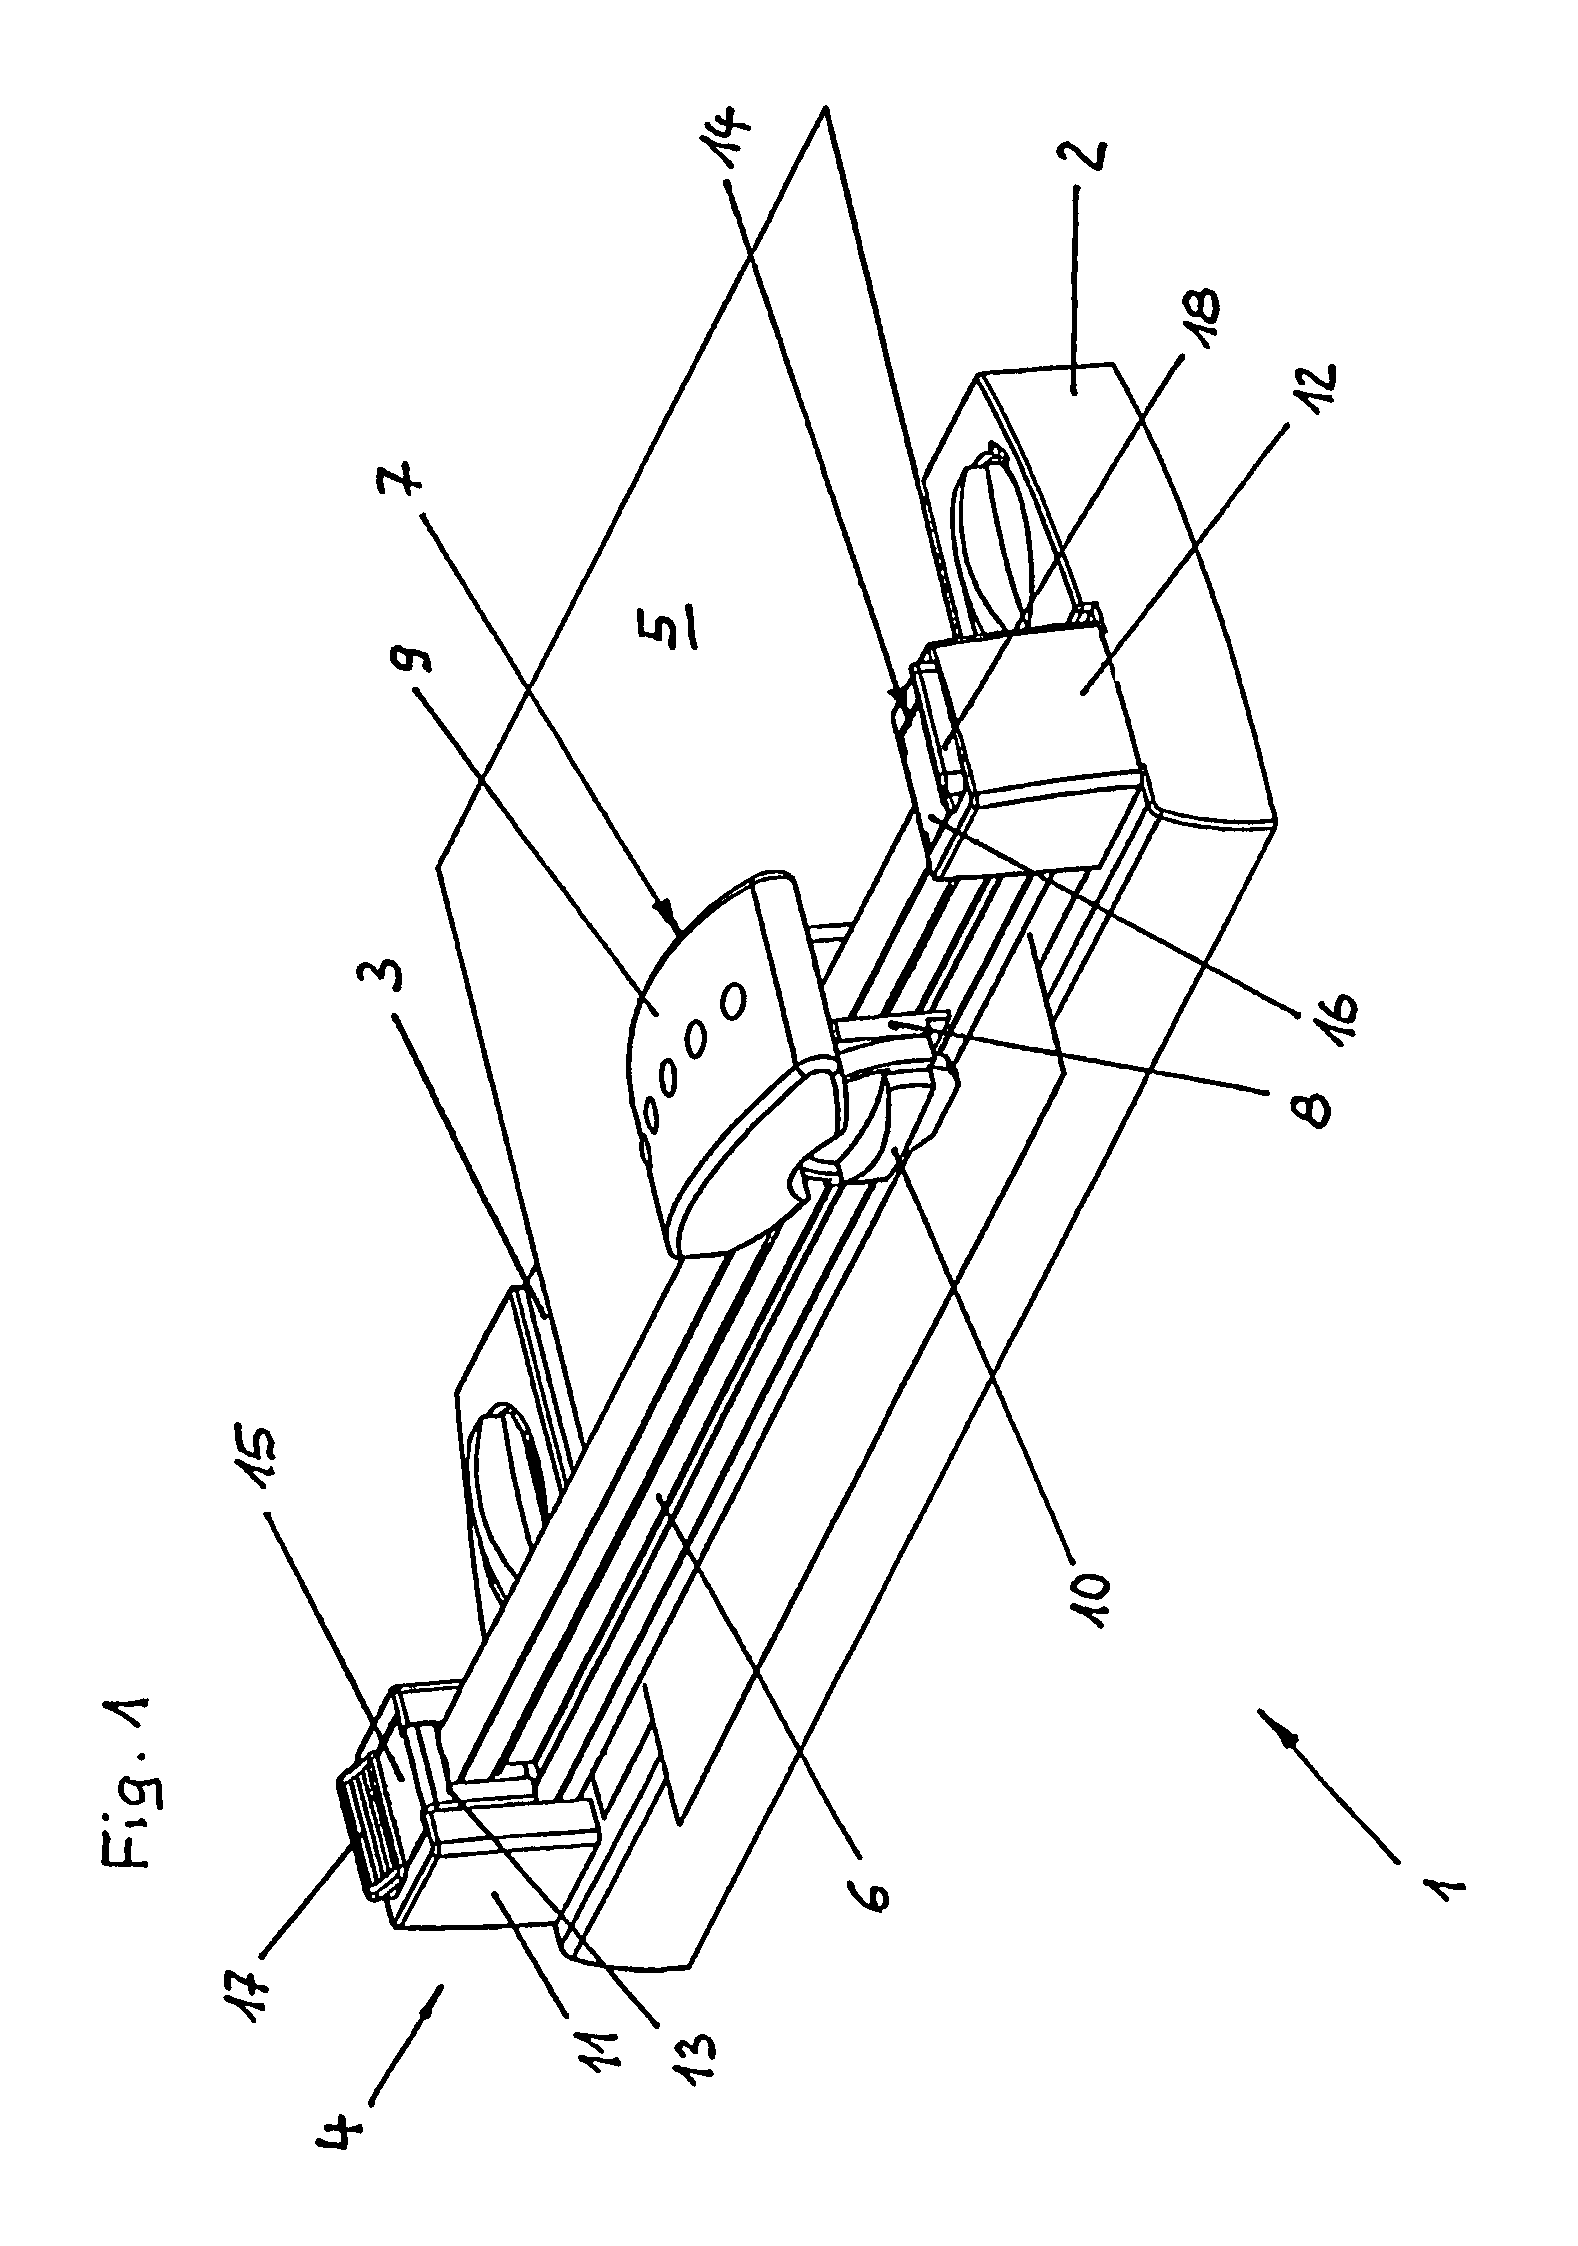 Rotary cutting unit for trimming sheet material